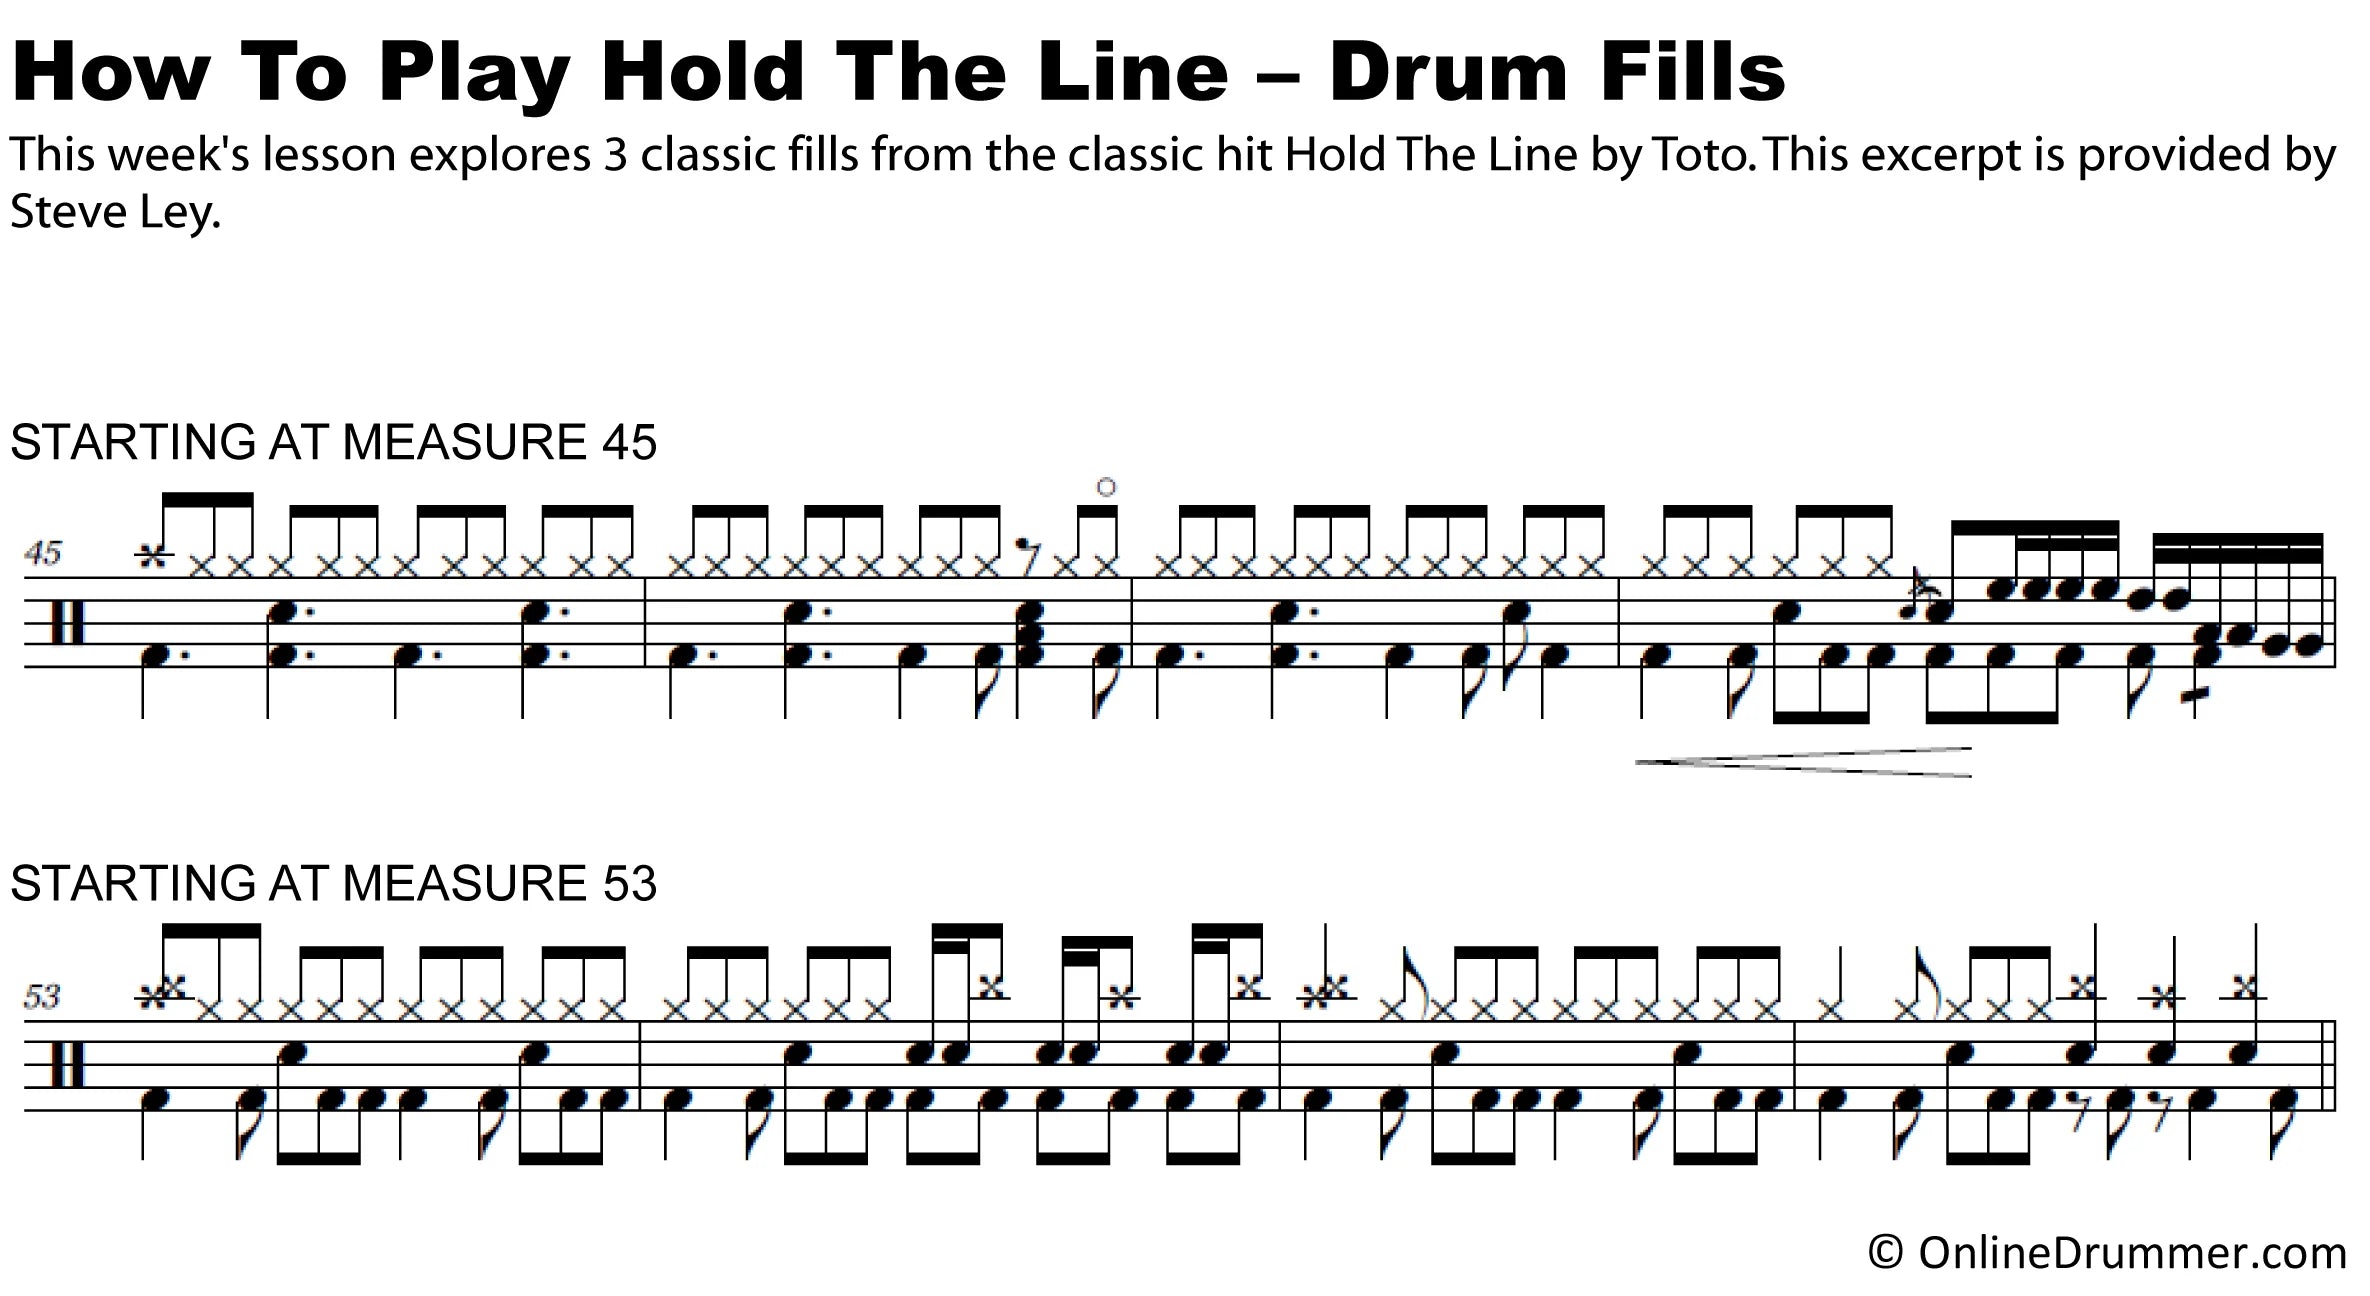 How To Play Hold The Line - Toto - Drum Fills